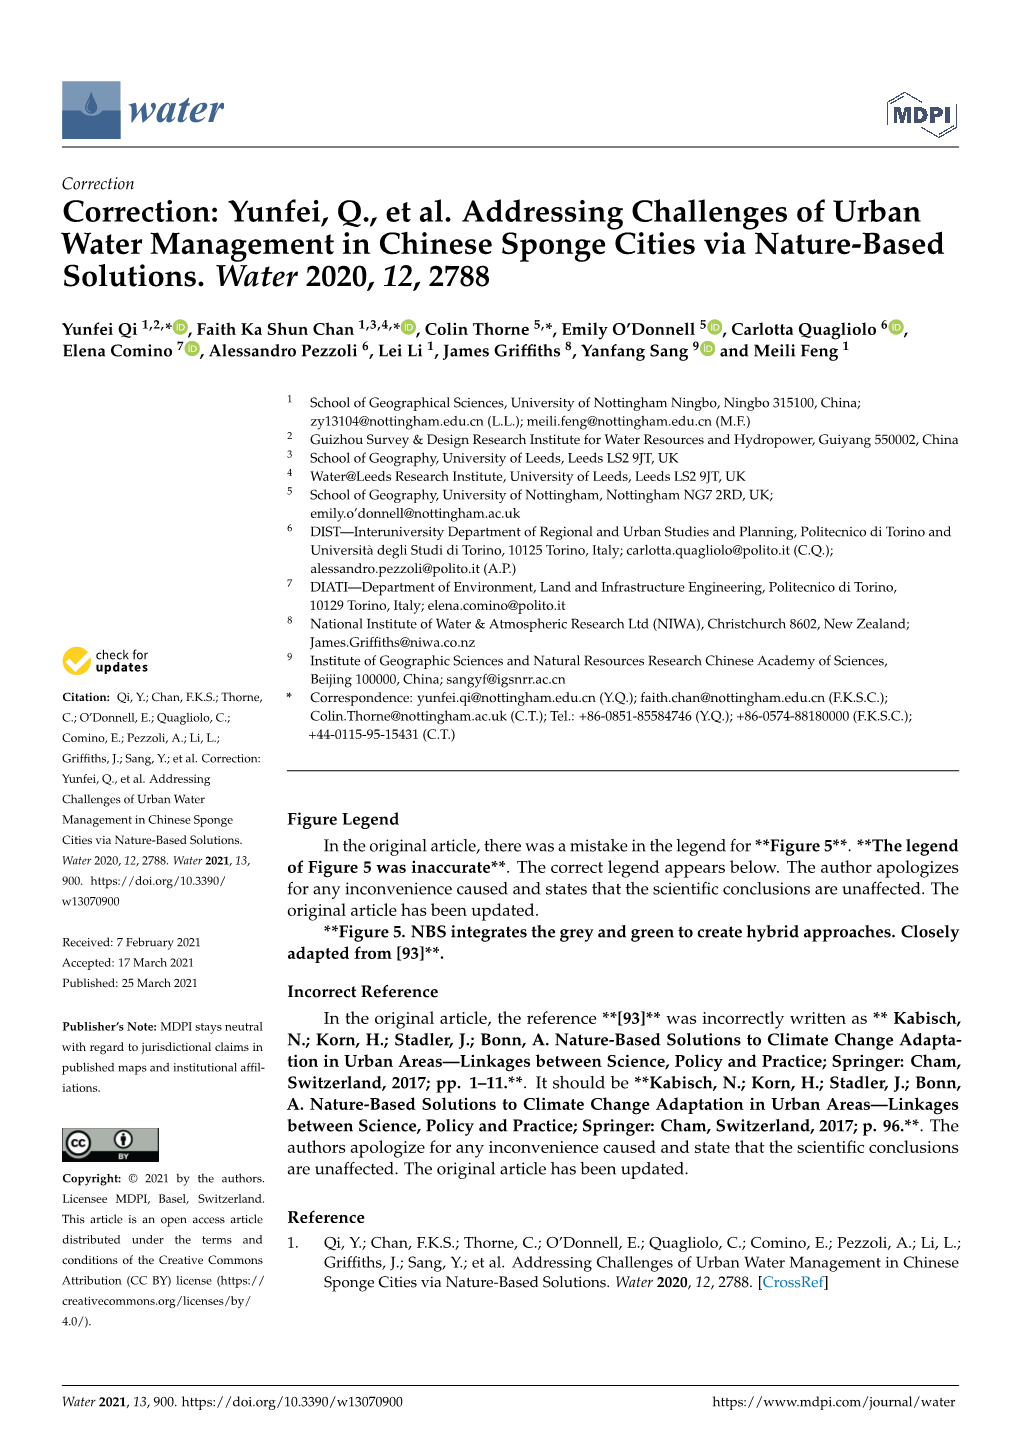 Correction: Yunfei, Q., Et Al. Addressing Challenges of Urban Water Management in Chinese Sponge Cities Via Nature-Based Solutions